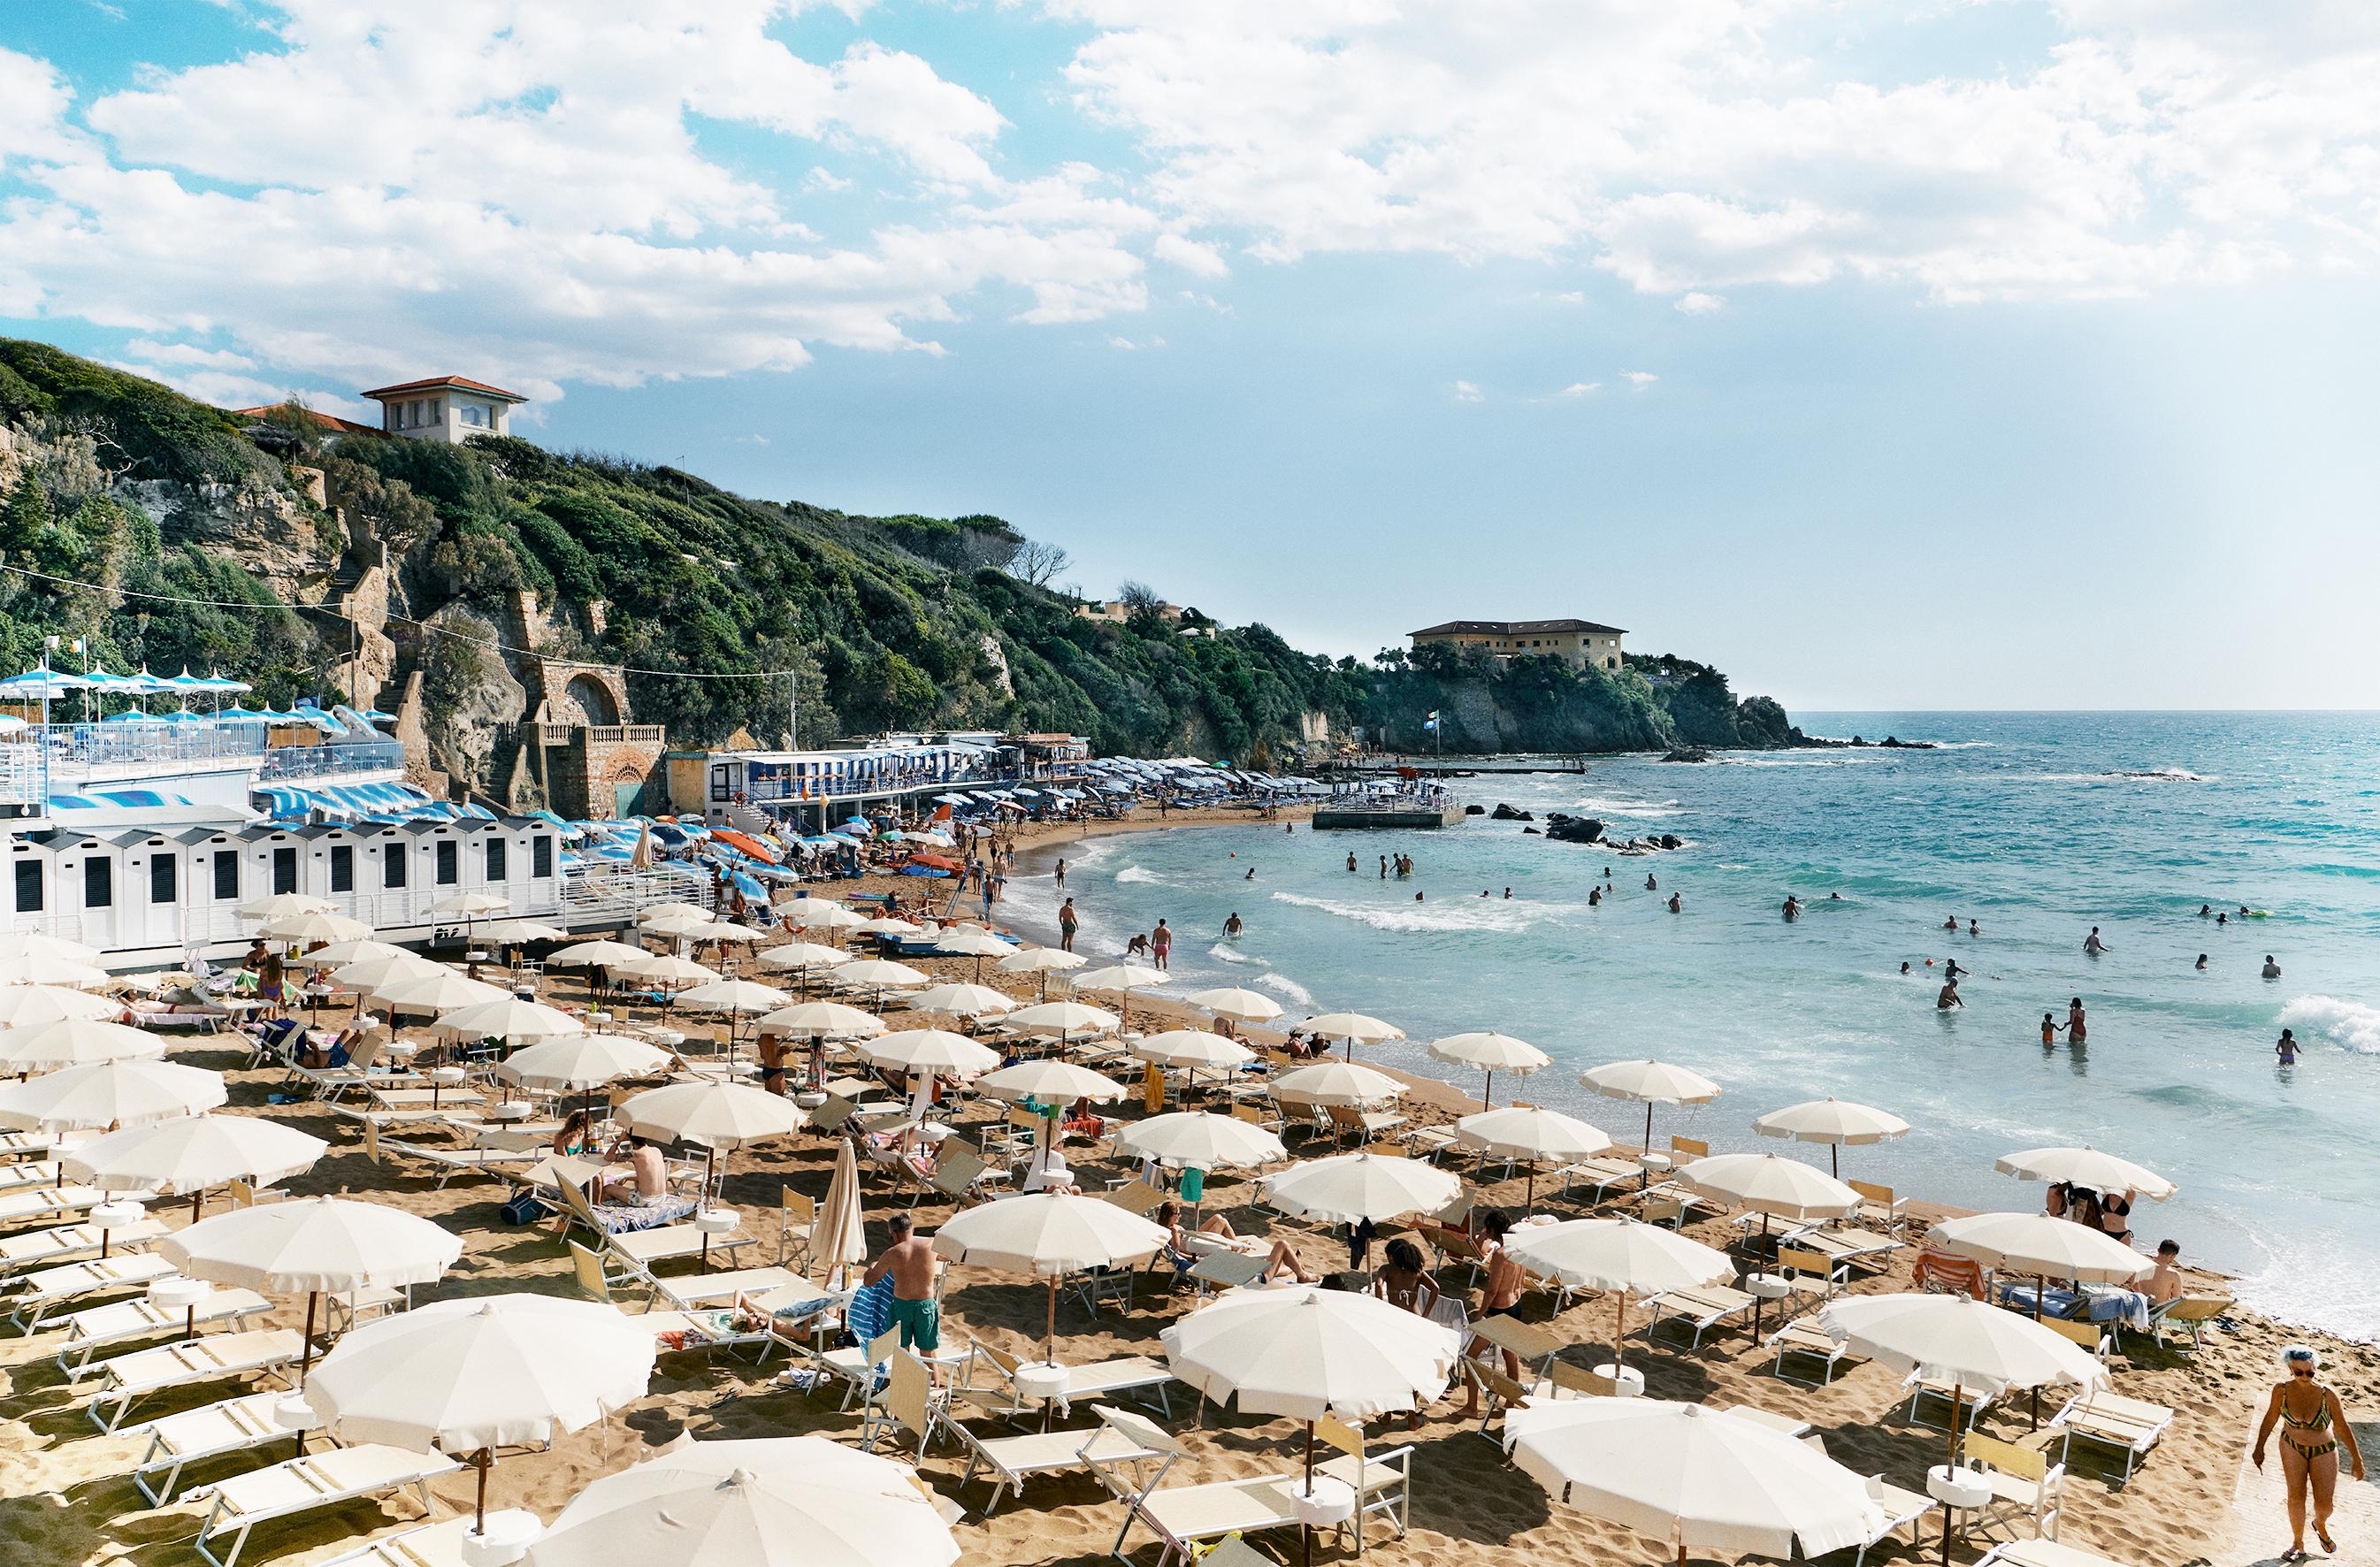 Florian Innerkofler Landscape Photograph - Quercetano Italy Uno- Beach and Sea View with Umbrellas, People, and Mountains